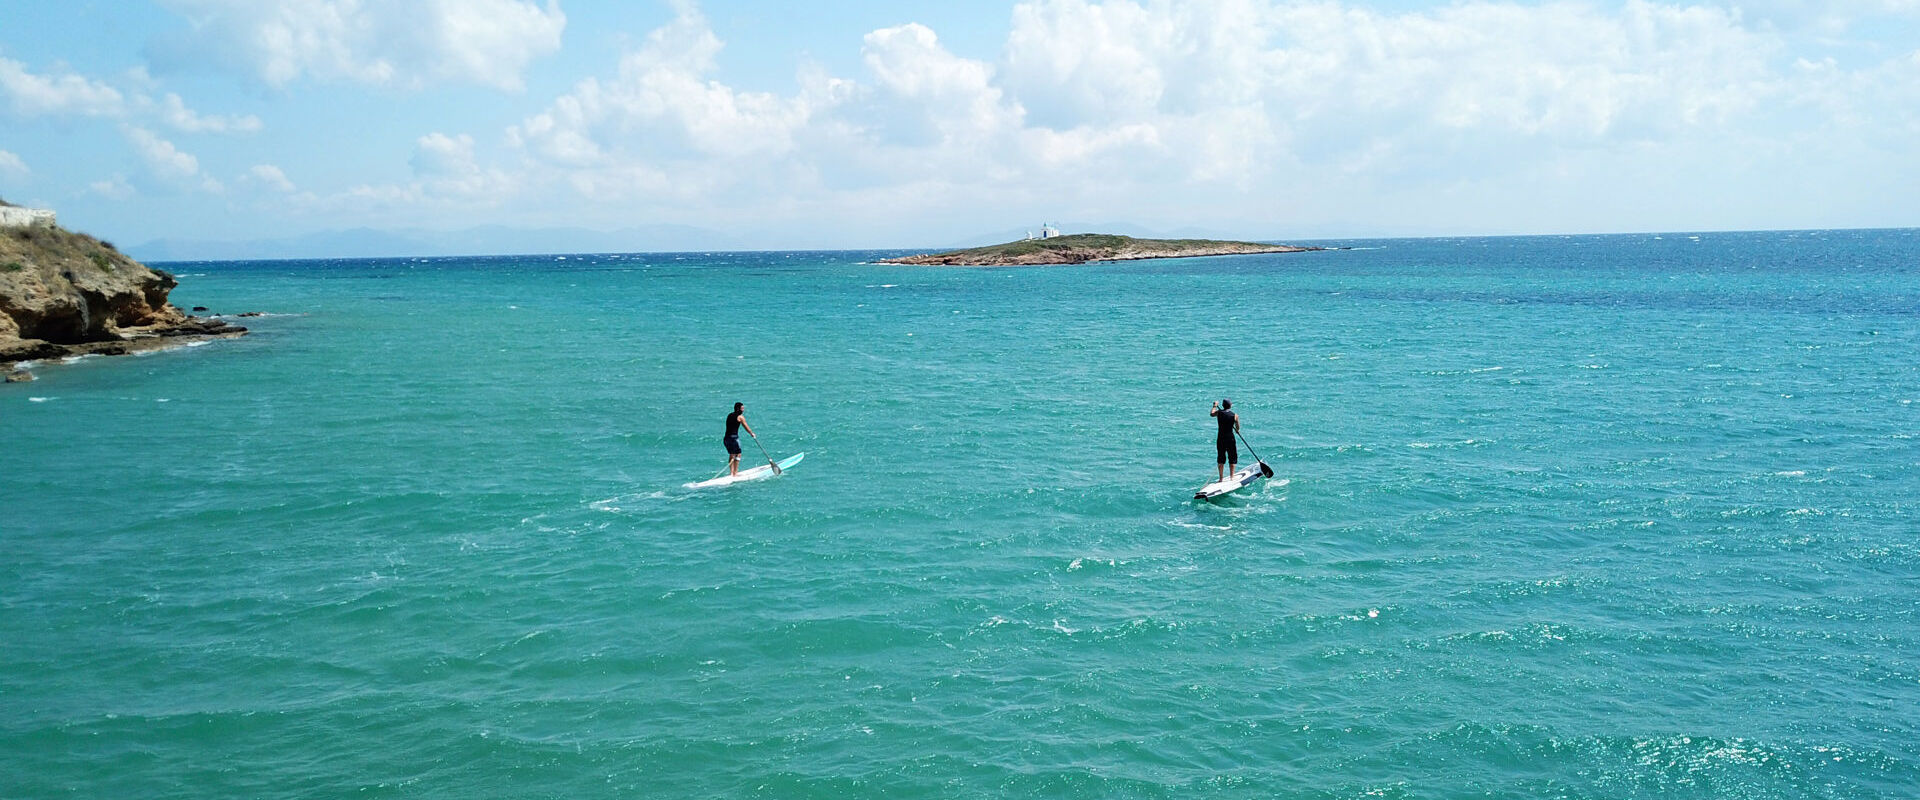 Aerial photo of competition sport paddle surfing or sup between 2 men in tropical waters of Vouliagmeni beach, Athens riviera, Attica, Greece